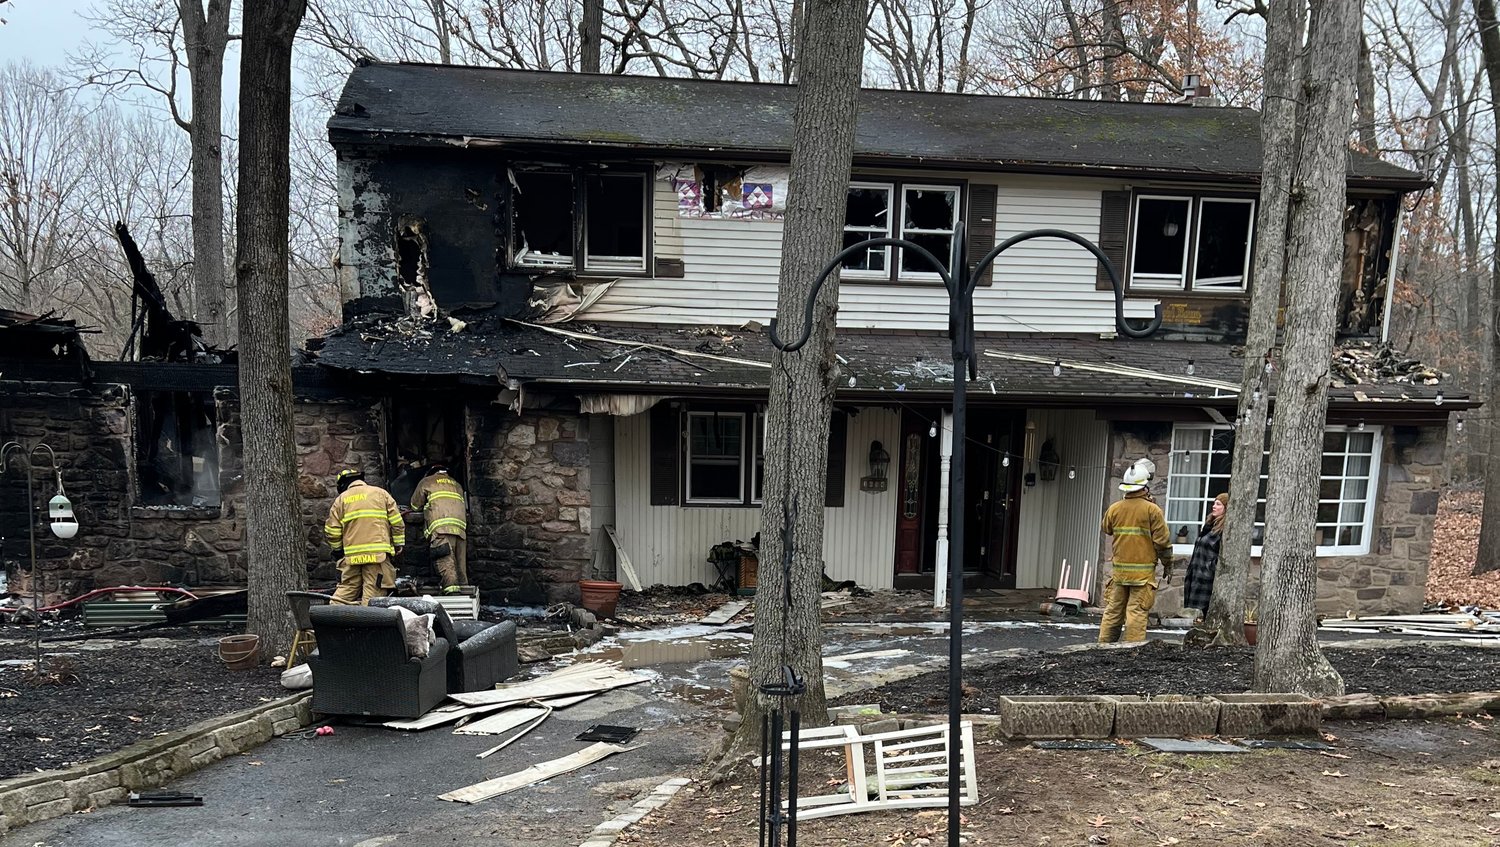 A Buckingham Township family was left homeless after a fire ripped through its home on Jan. 10. A GoFundMe page has been started.